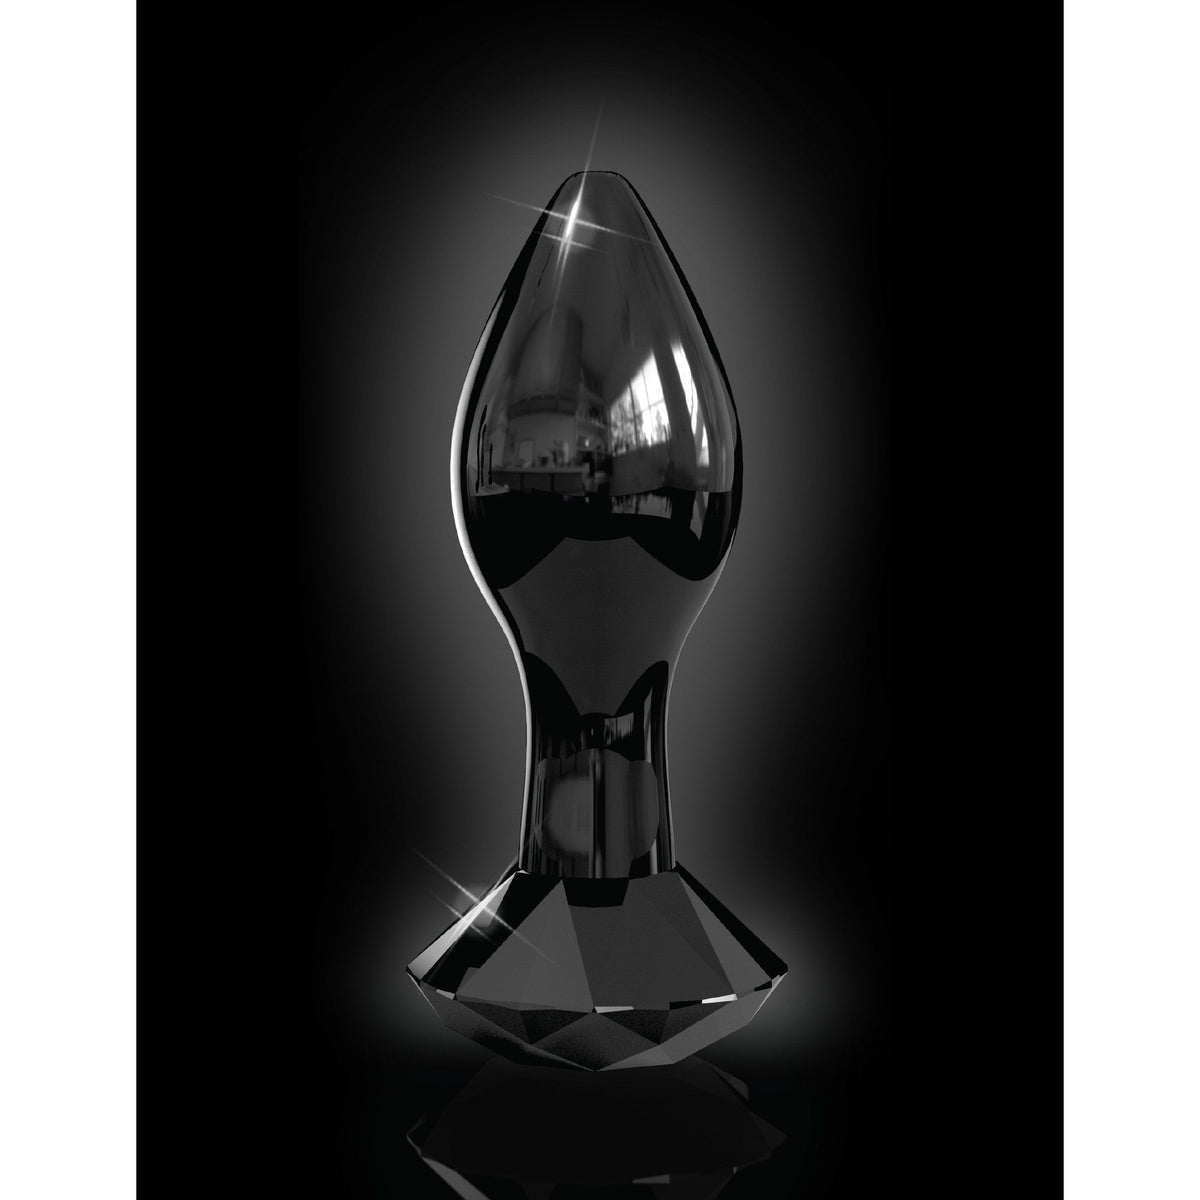 Pipedream - Icicles No 78 Hand Blown Massager (Black) PD1660 CherryAffairs